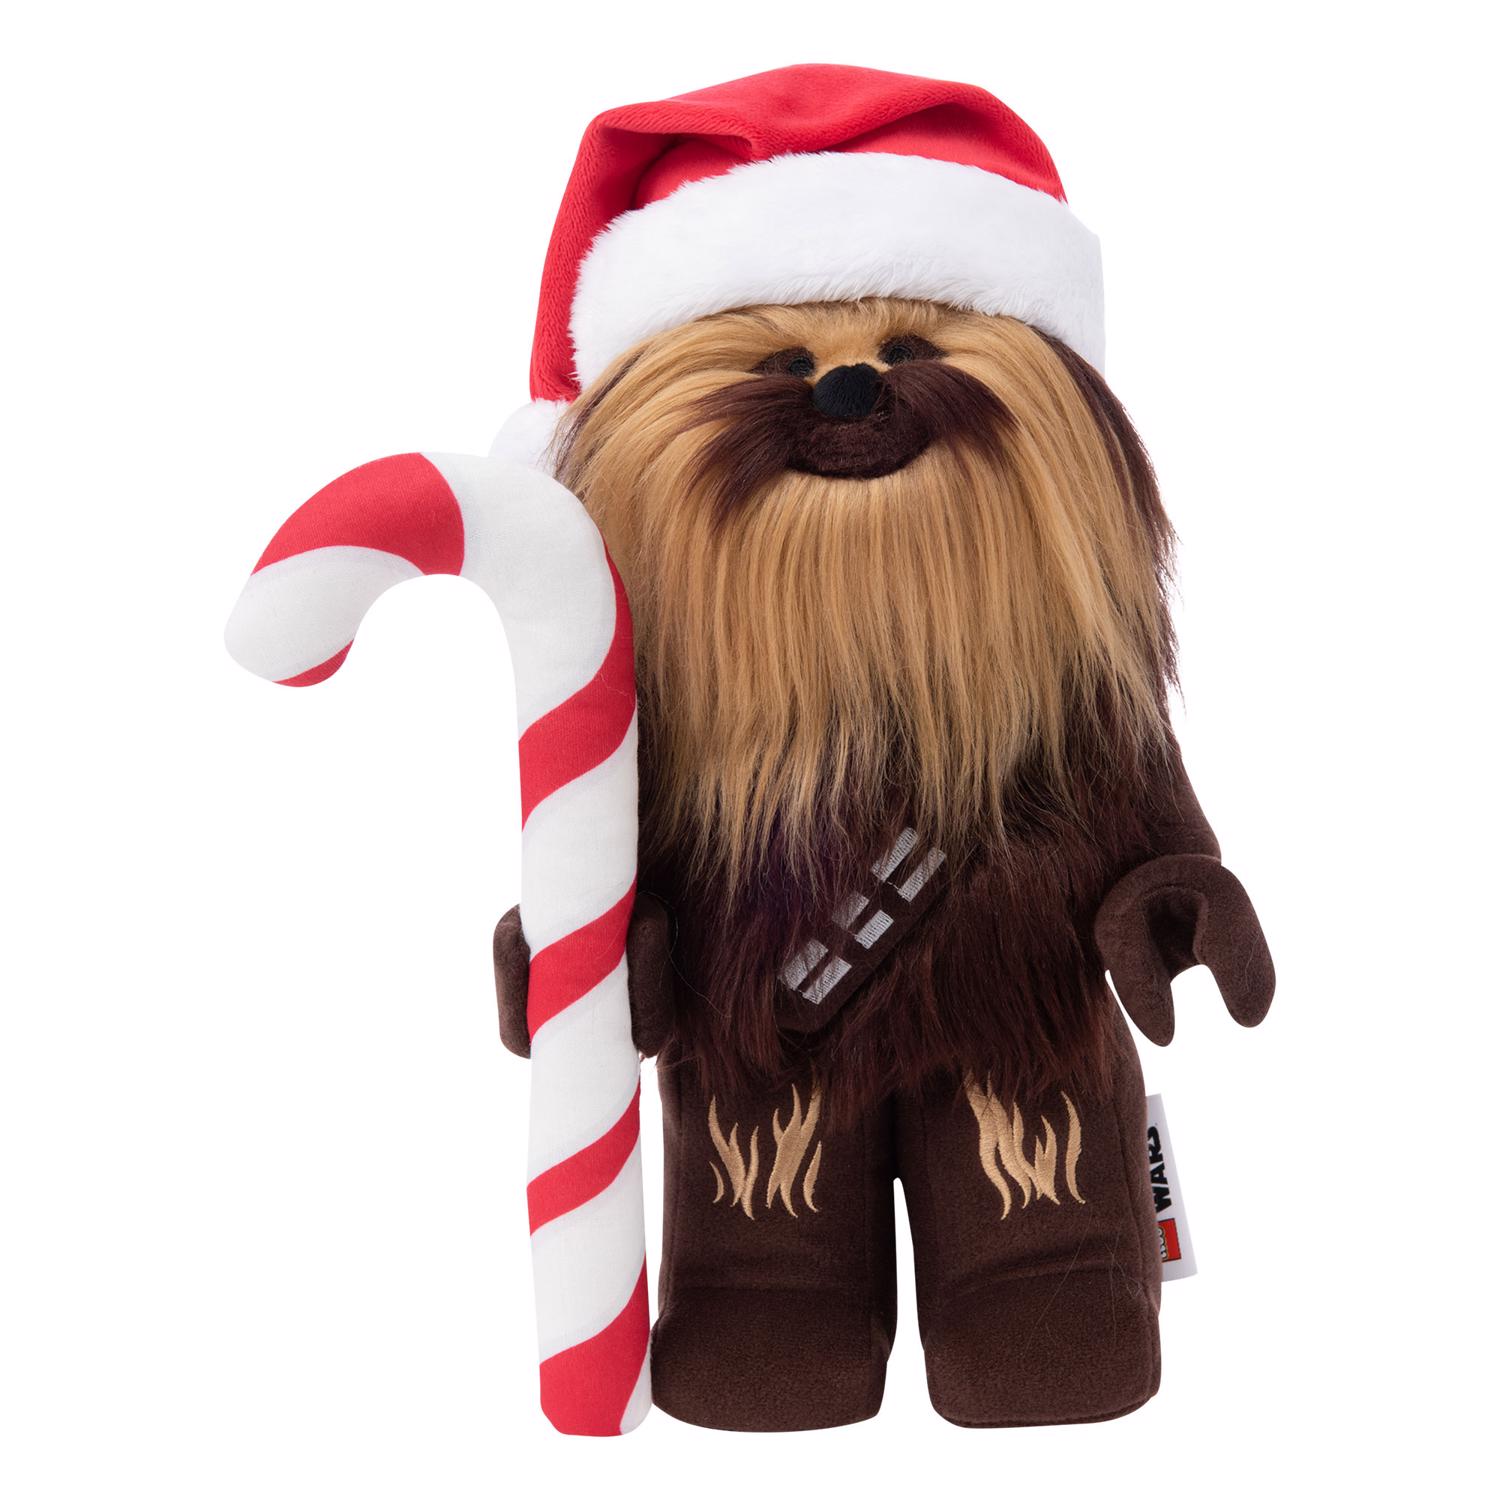 Photos - Other interior and decor MANHATTAN Toy LEGO Star Wars Holiday Chewbacca Plush Multicolored 1 pc 346 